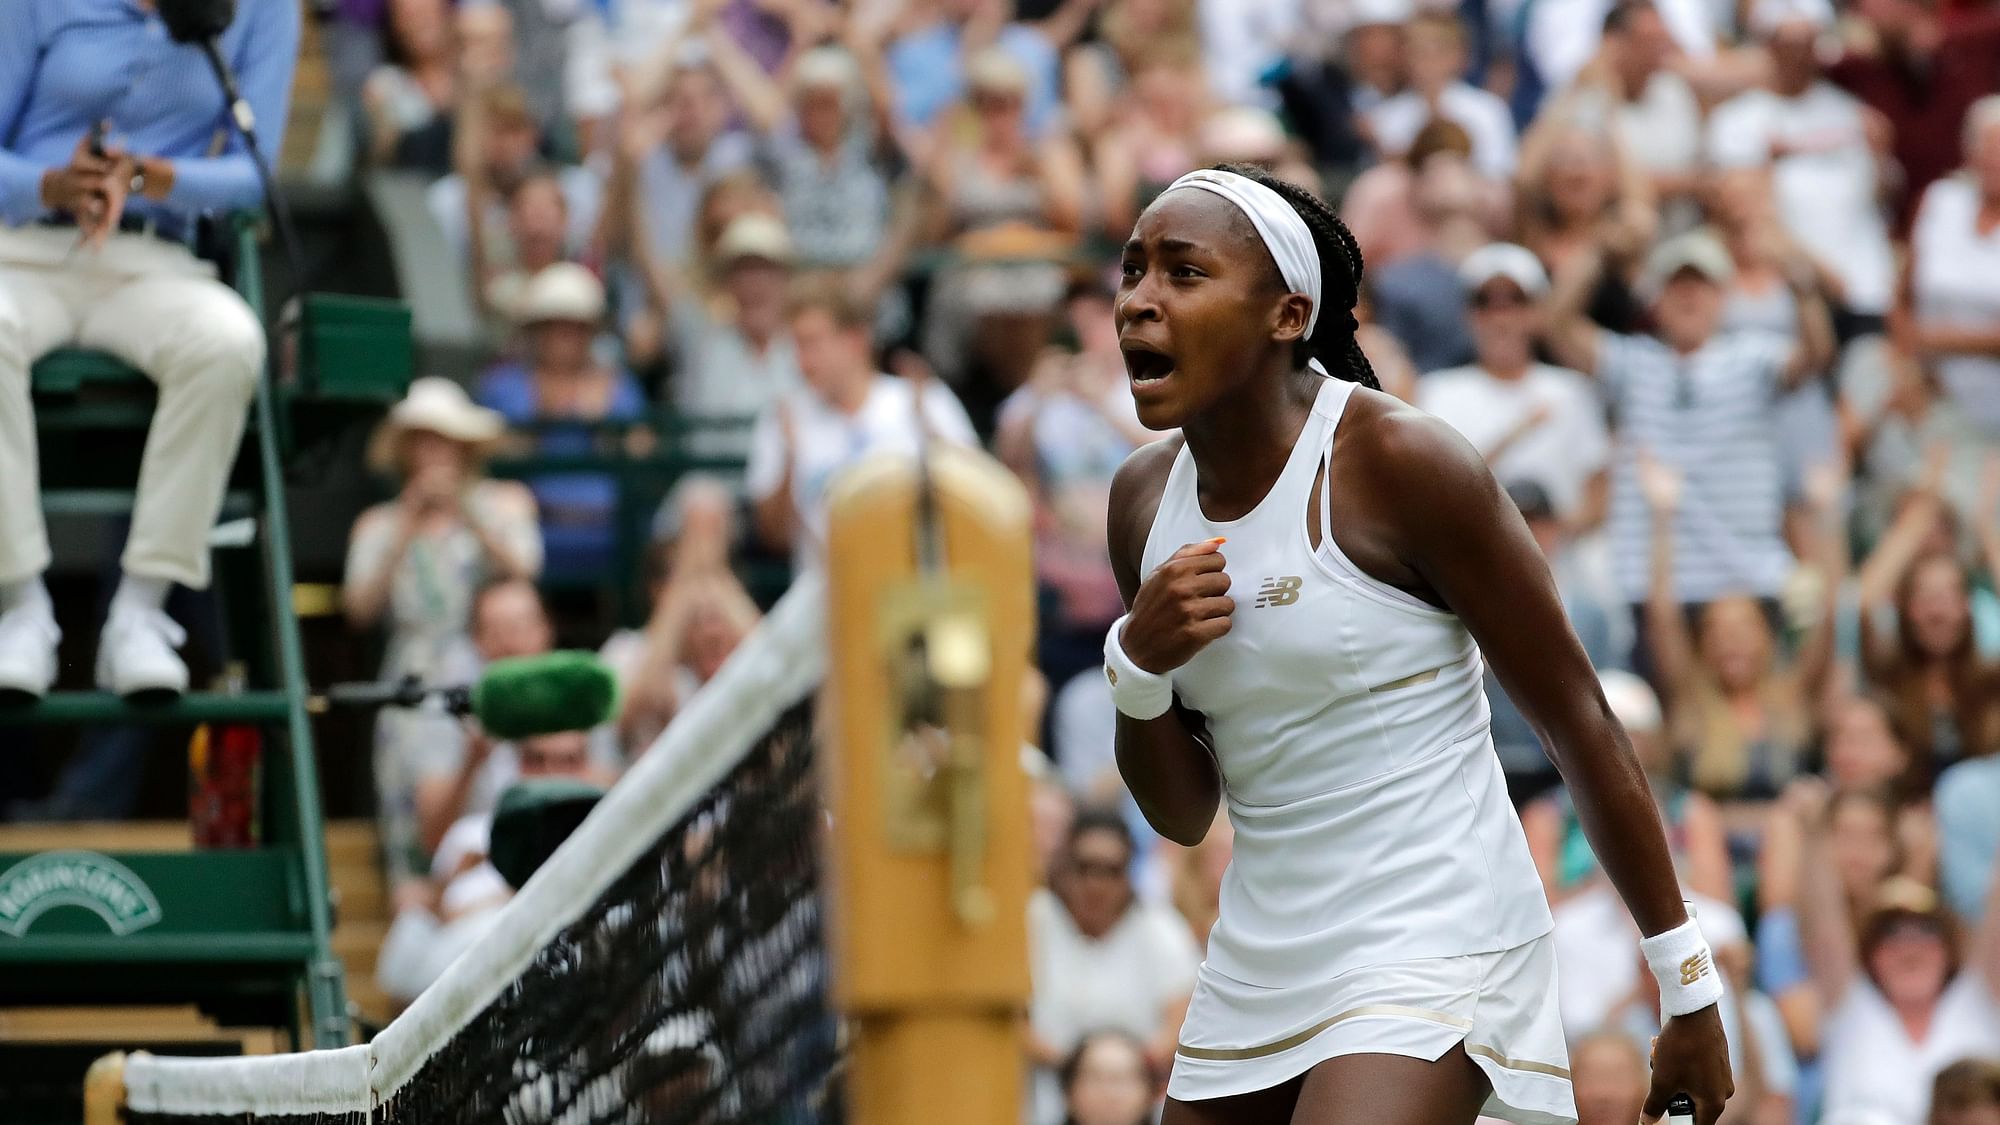 United States’ Cori “Coco” Gauff reacts after winning the second set against Slovenia’s Polona Hercog in a Women’s singles match during day five of the Wimbledon Tennis Championships in London, Friday, July 5, 2019.&nbsp;